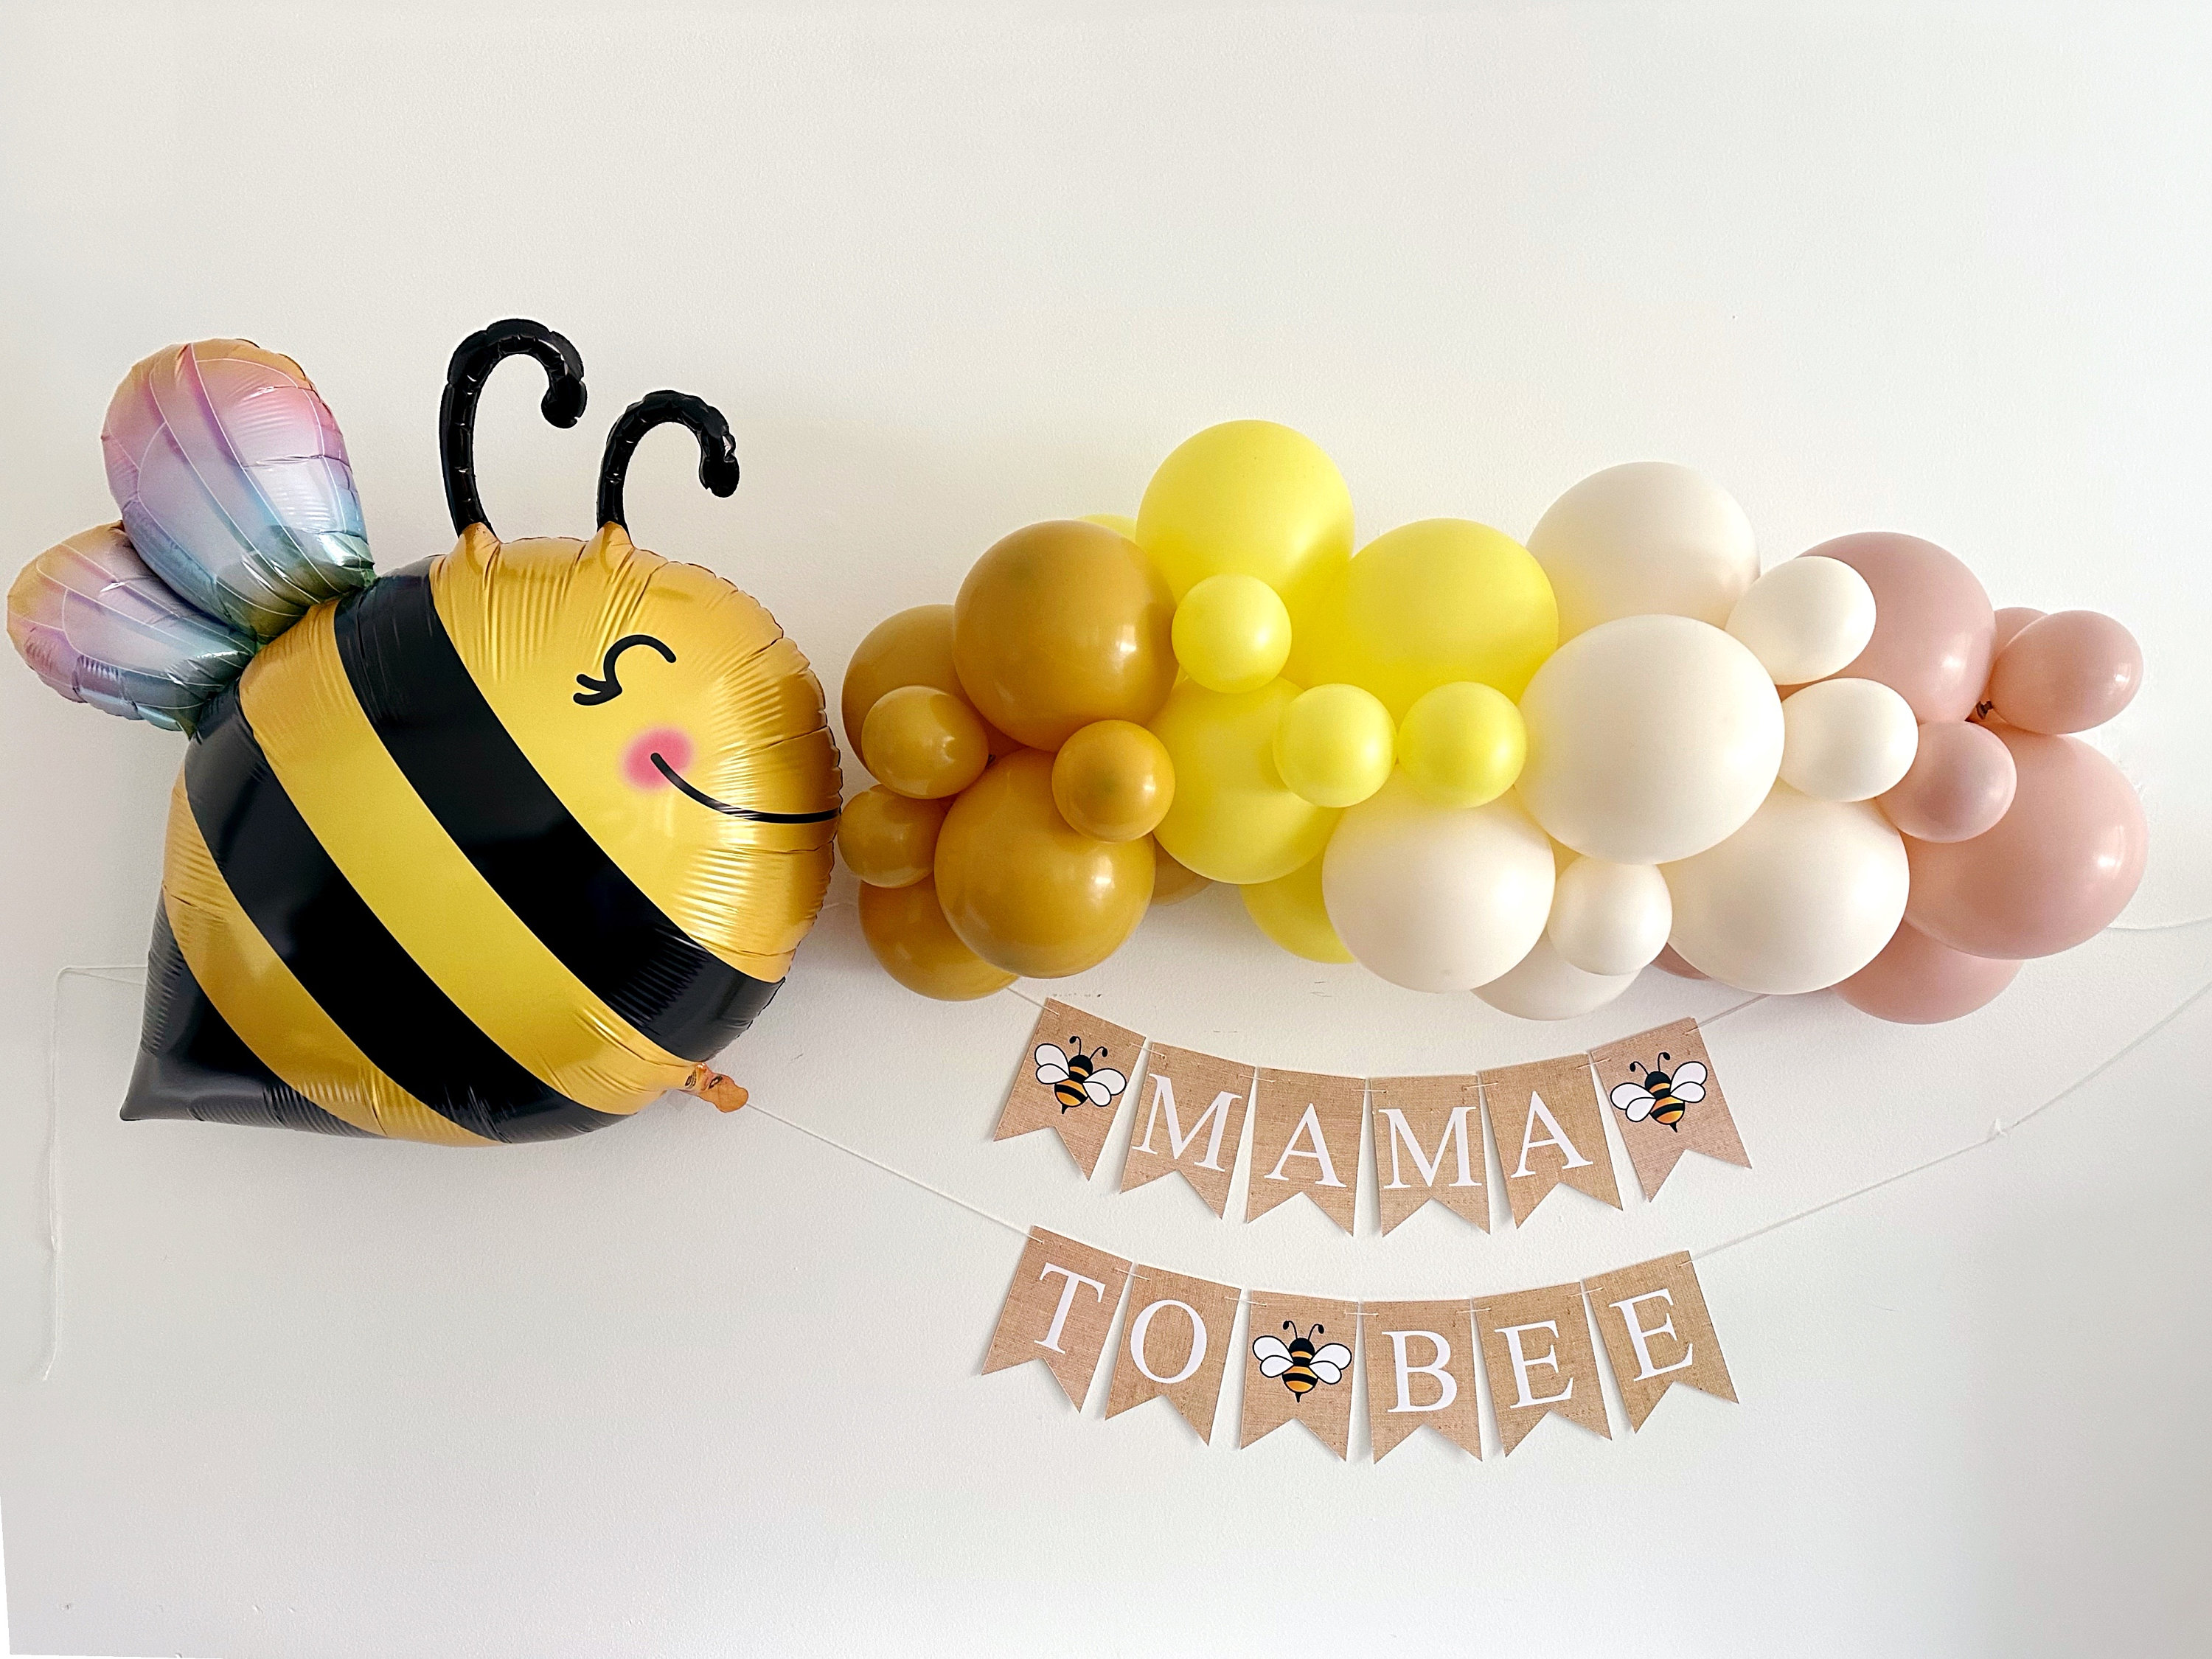 15 HONEY BEES EDIBLE Sugar Cupcake or Cake Toppers Bee Decorations for  Party Desserts, Birthdays, Spring Themed Party 